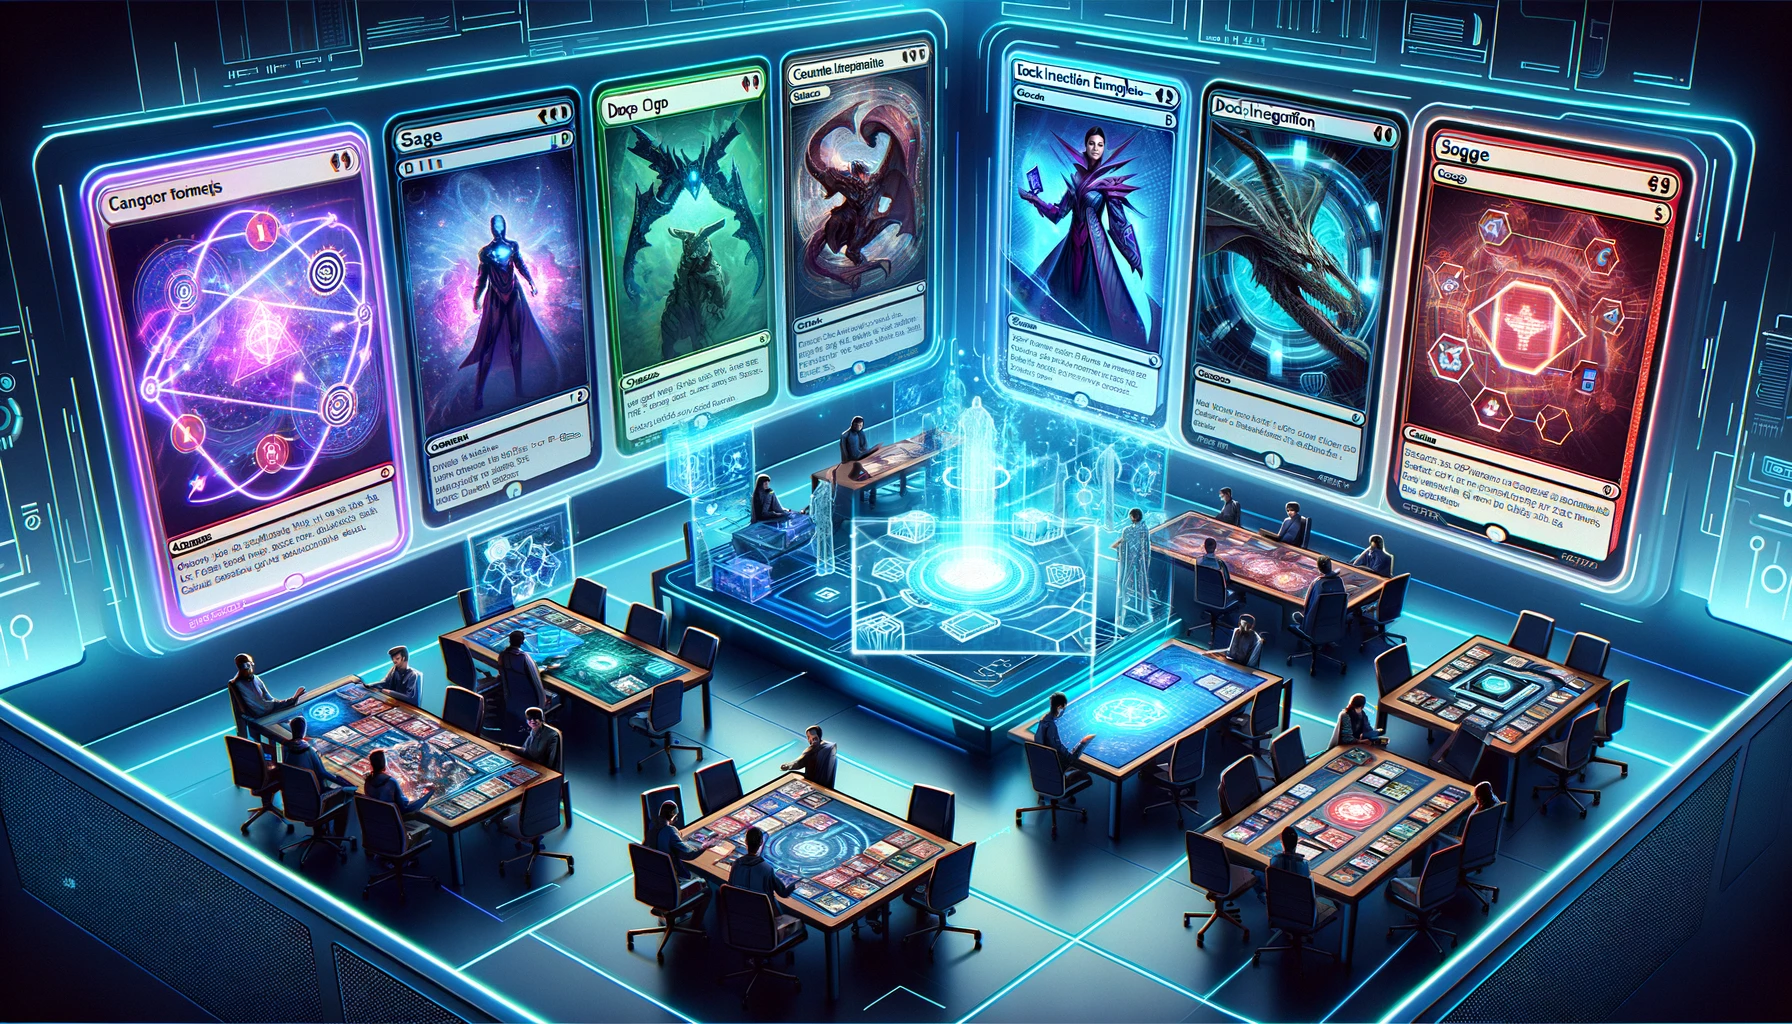 An illustration of a futuristic strategy room where various Marvel Snap decks are being analyzed. Strategists interact with large digital displays and holographic projections of cards, emphasizing the deep analysis and integration of strategic decks in a high-tech environment.